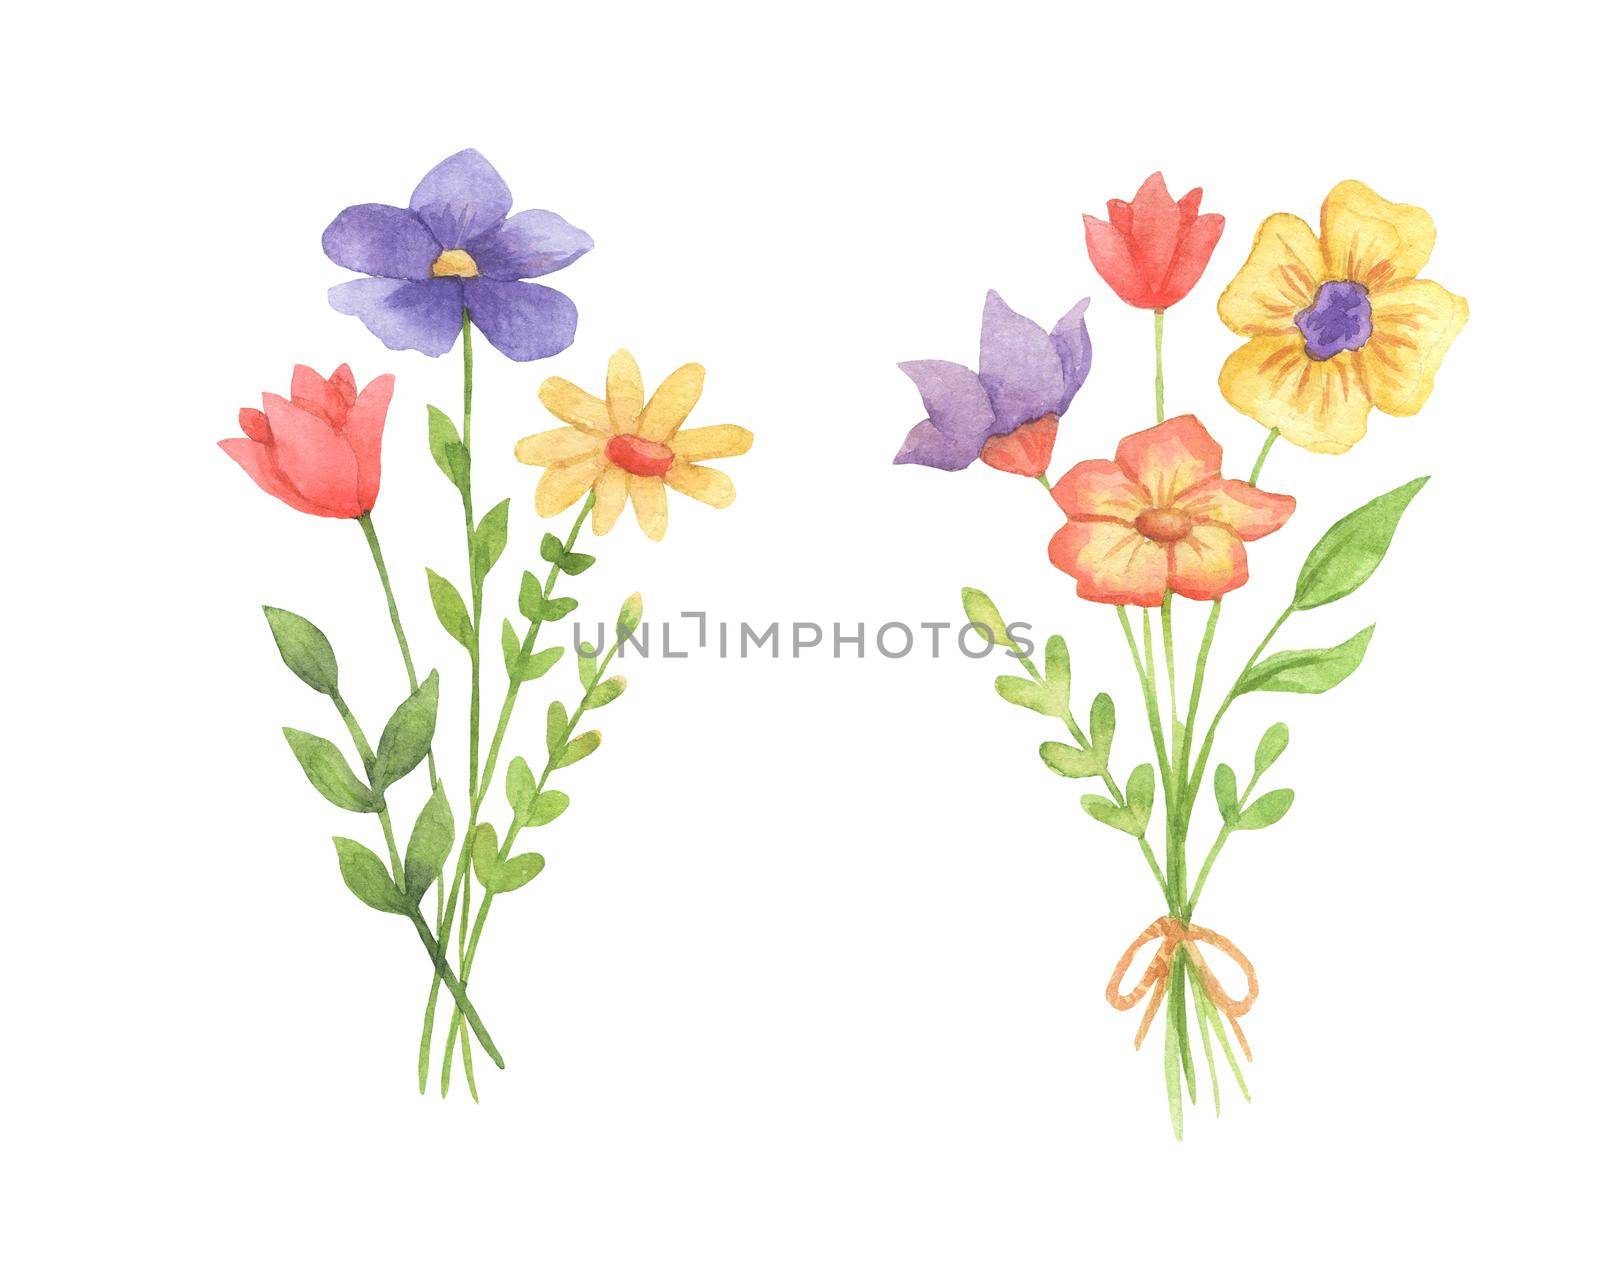 Watercolor illustration bouquet of flowers. Set of hand drawn wildflowers